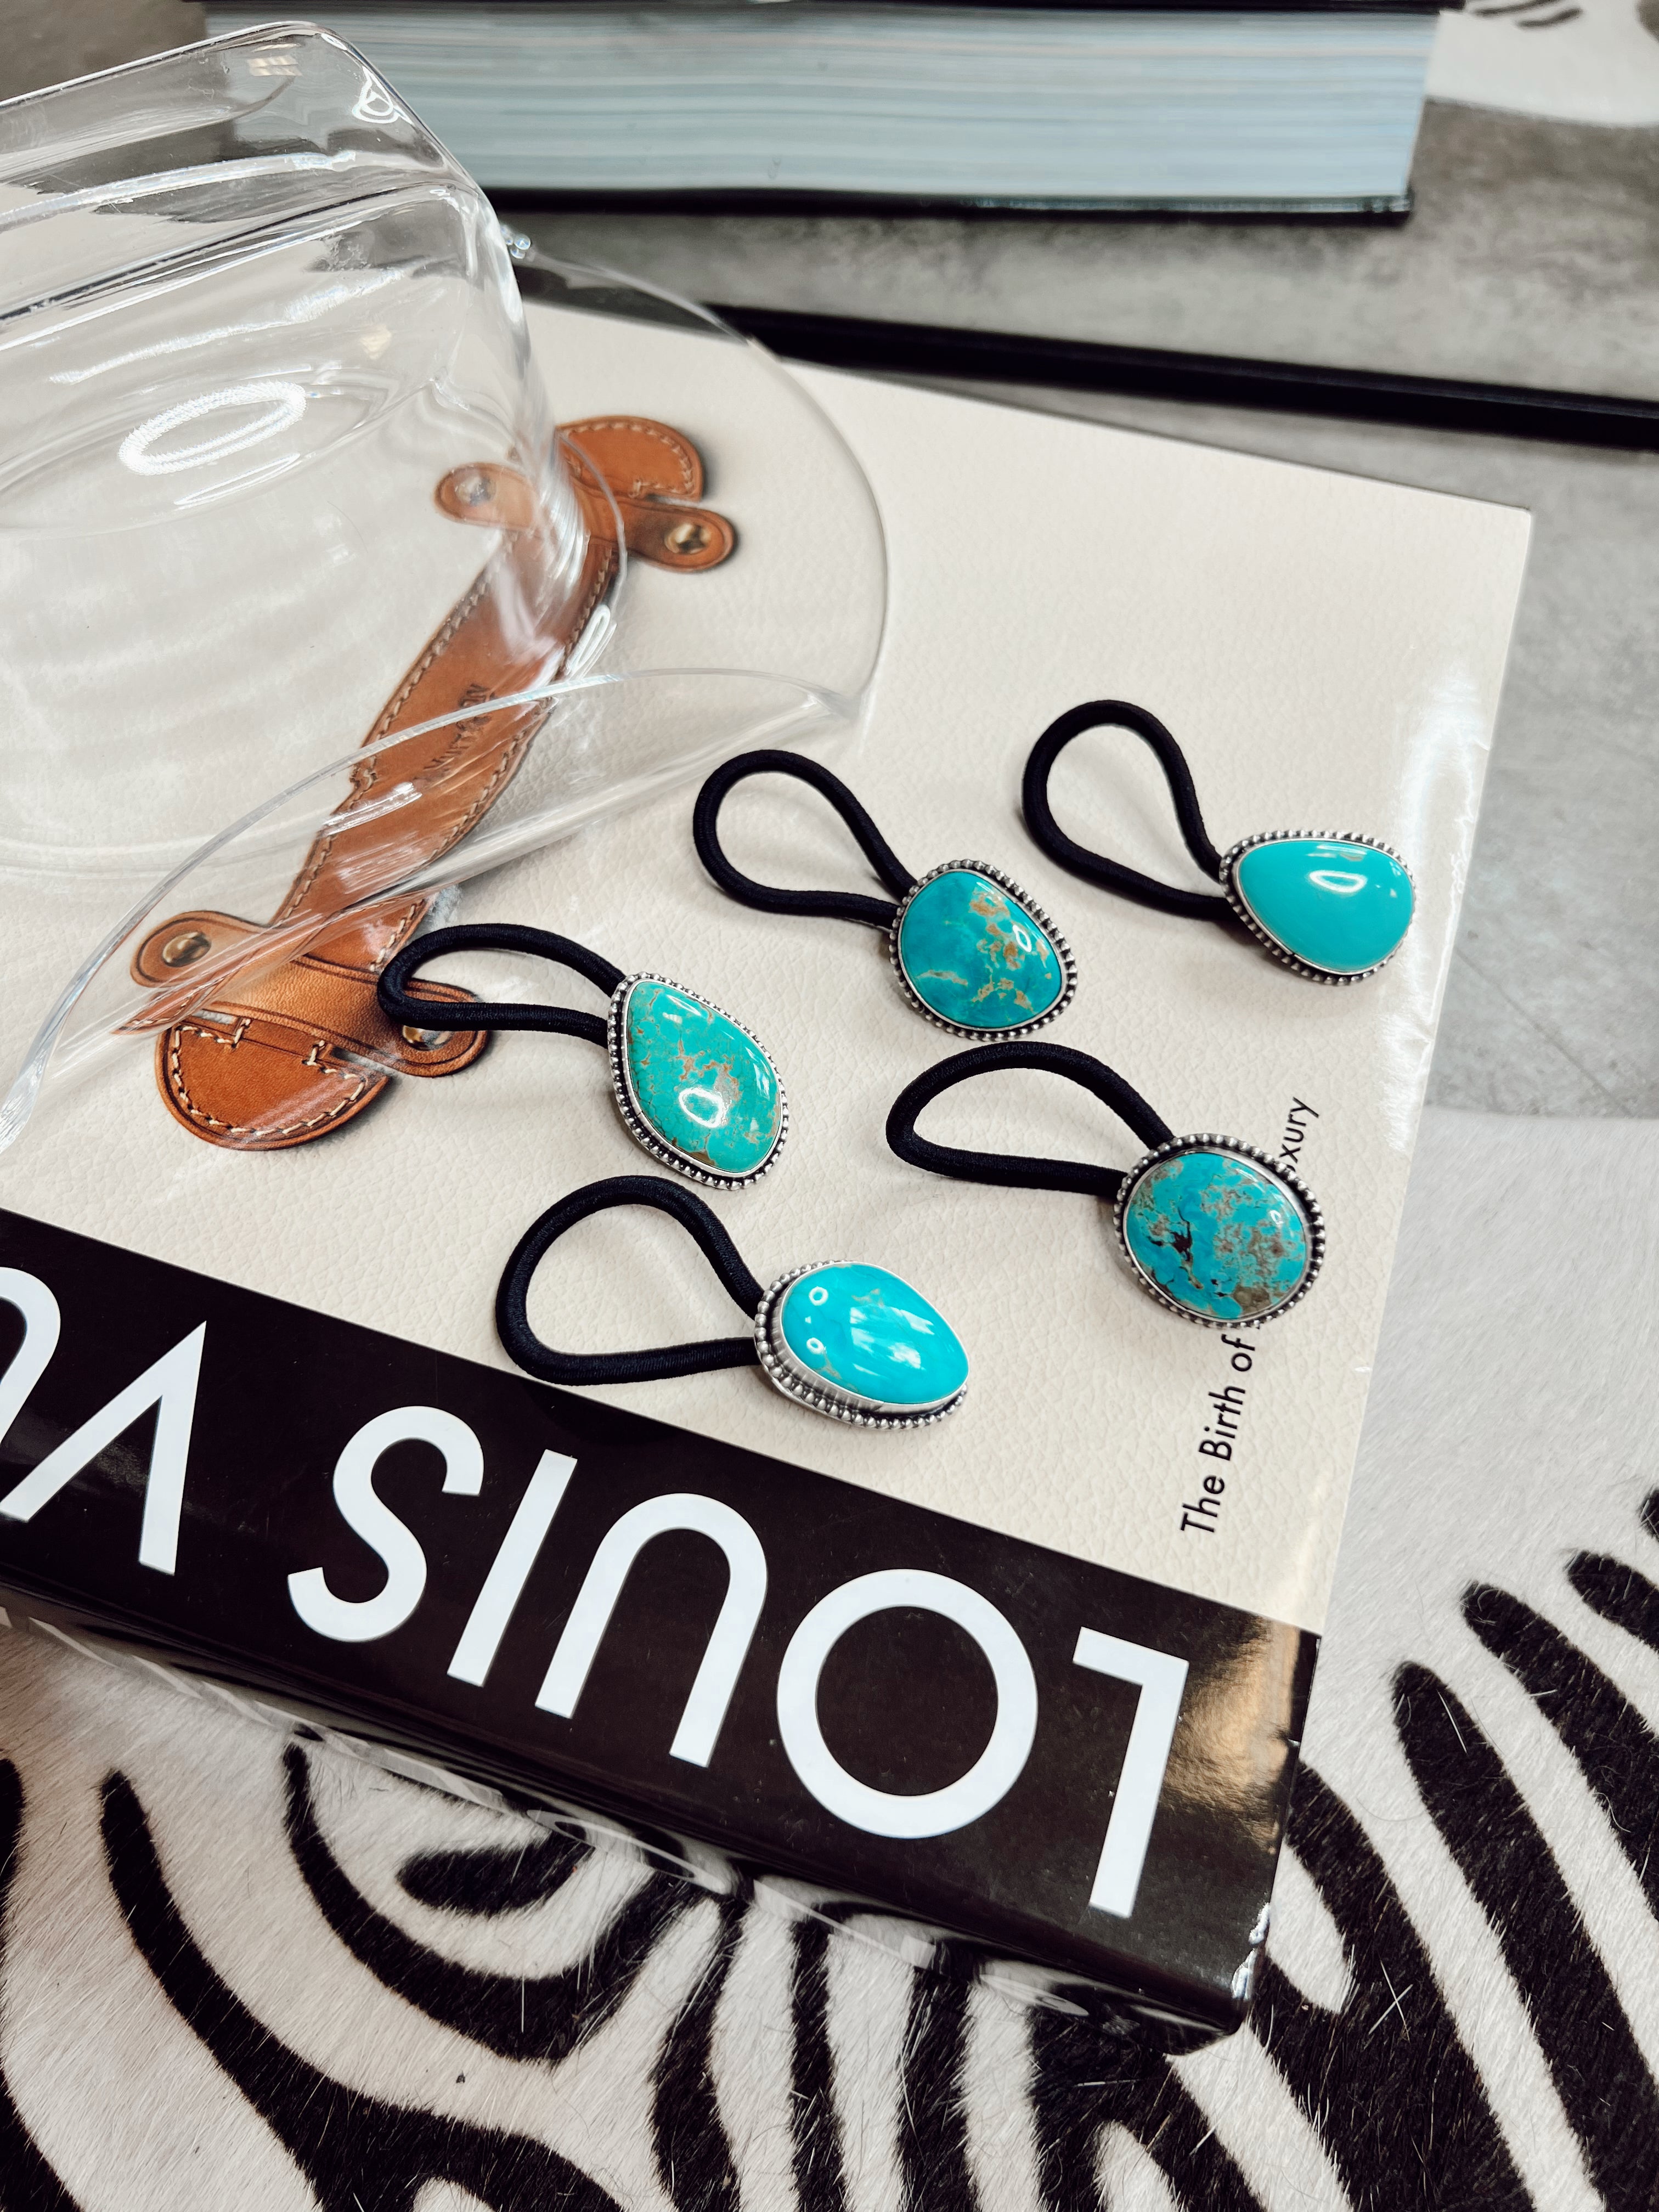 The Turquoise Stone Hair Tie 2.0